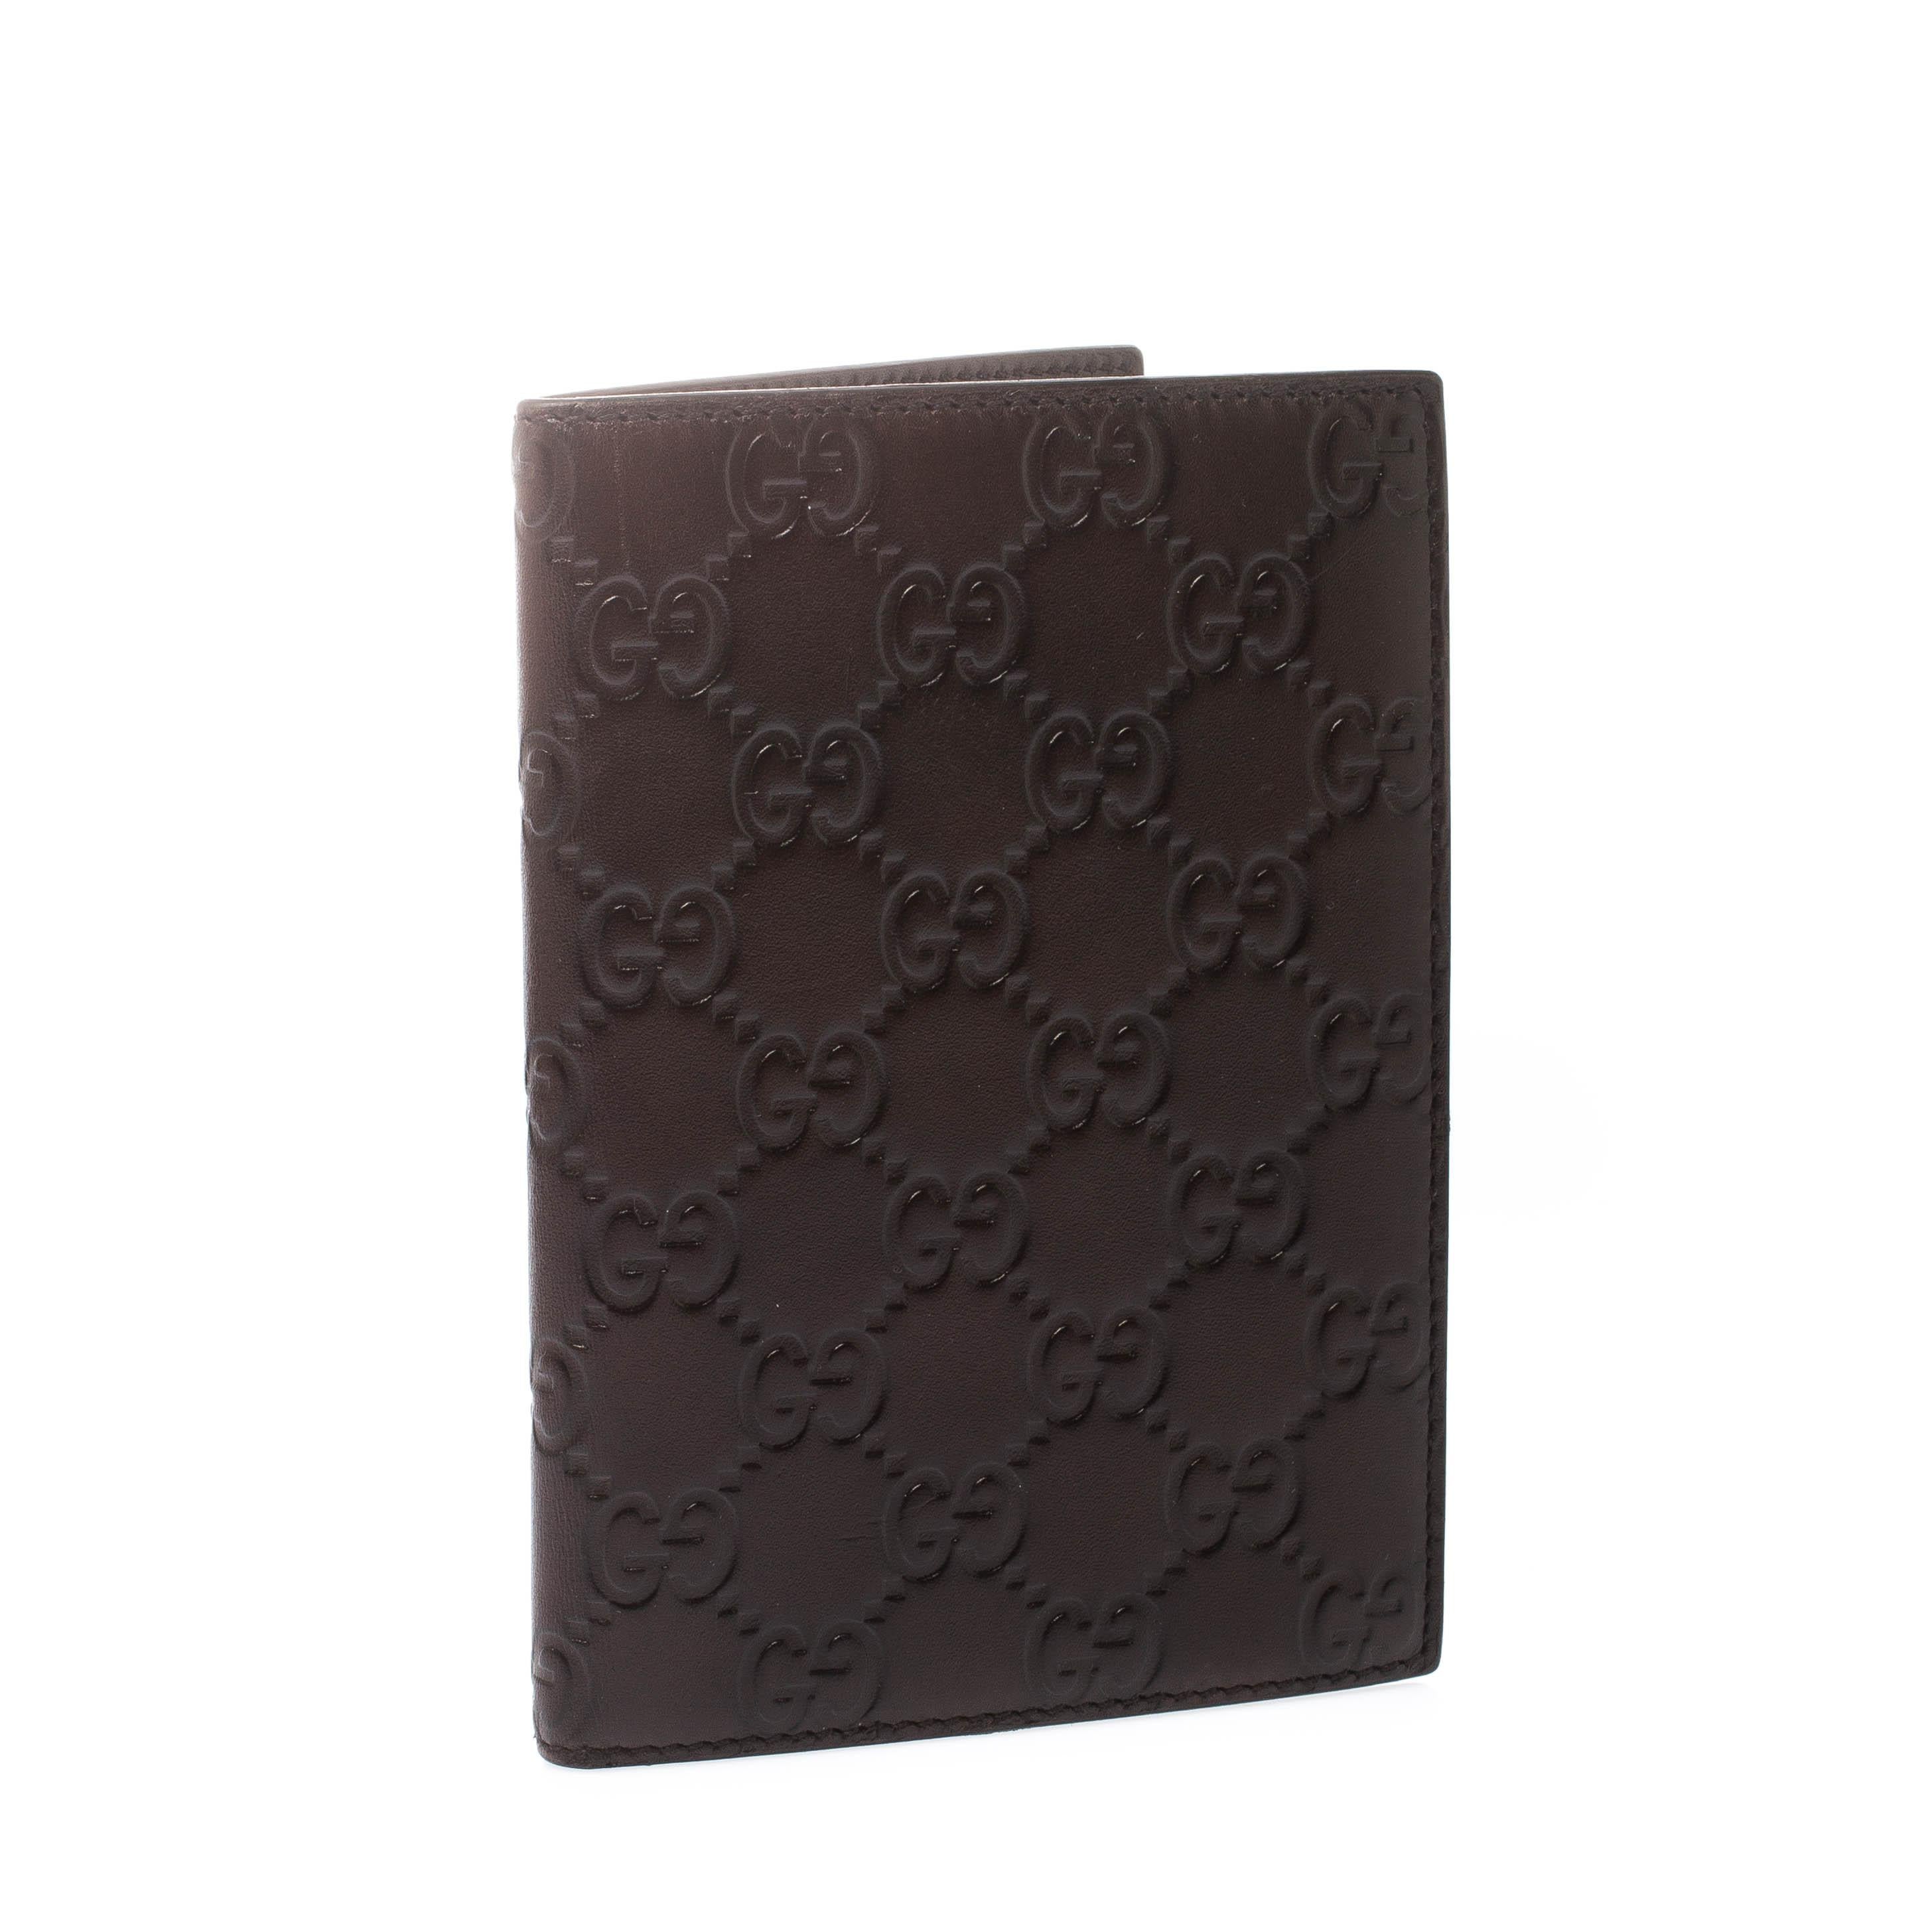 This frame holder is a functional piece that Gucci designed to assist you on your travels. The holder is crafted from Guccissima leather and it has plastic panels on the inside. This piece in brown is durable and well-made.

Includes: Original Box

